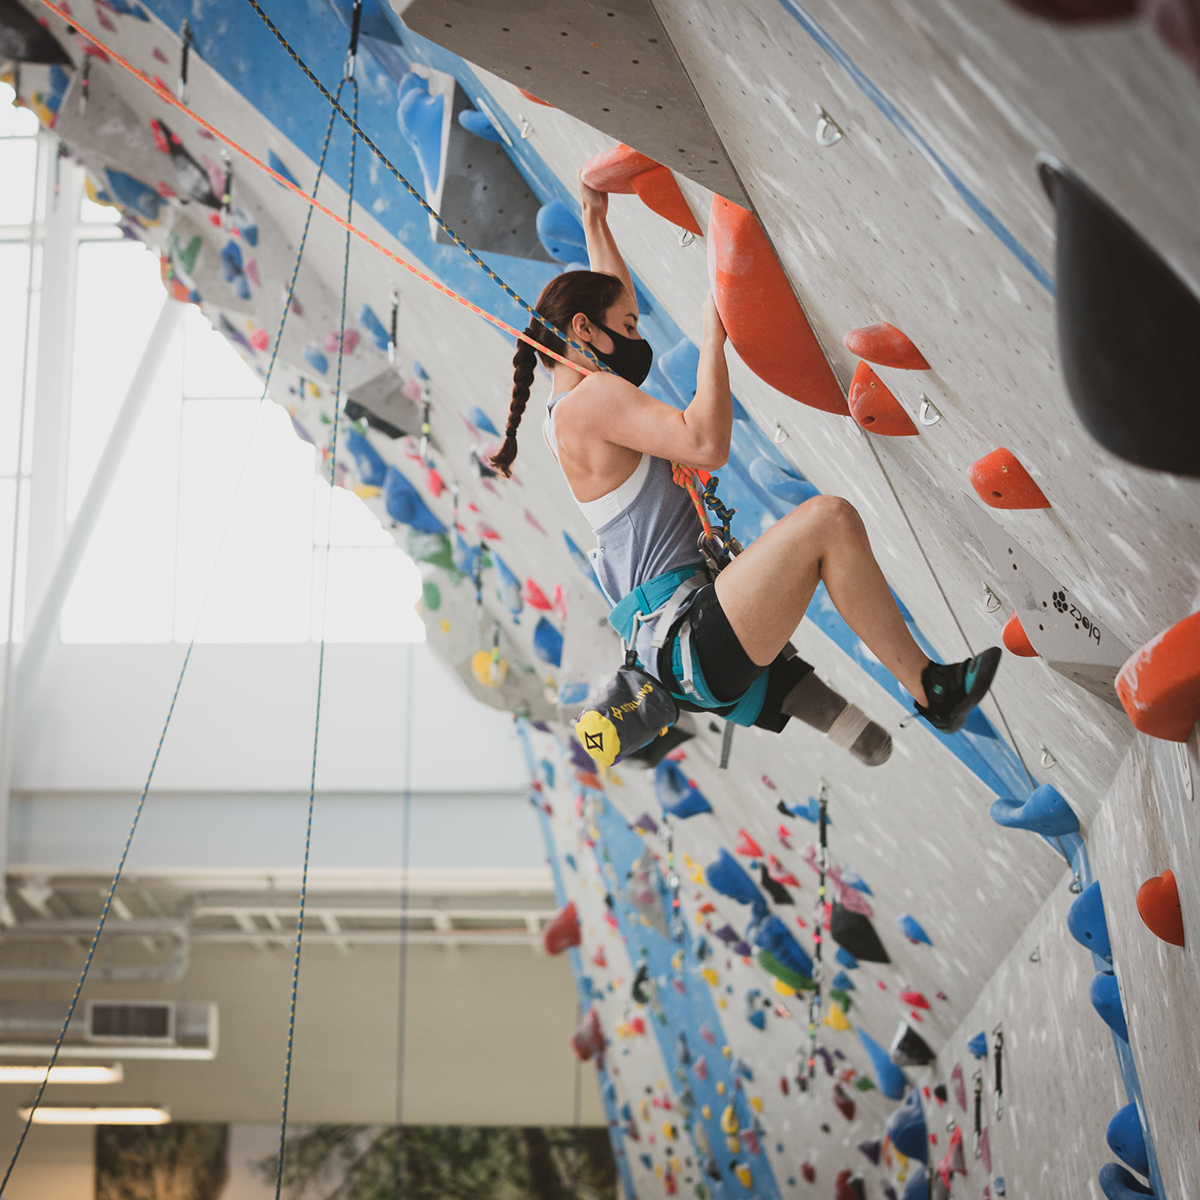 Paraclimbing athlete making their way up a climbing wall on top rope.